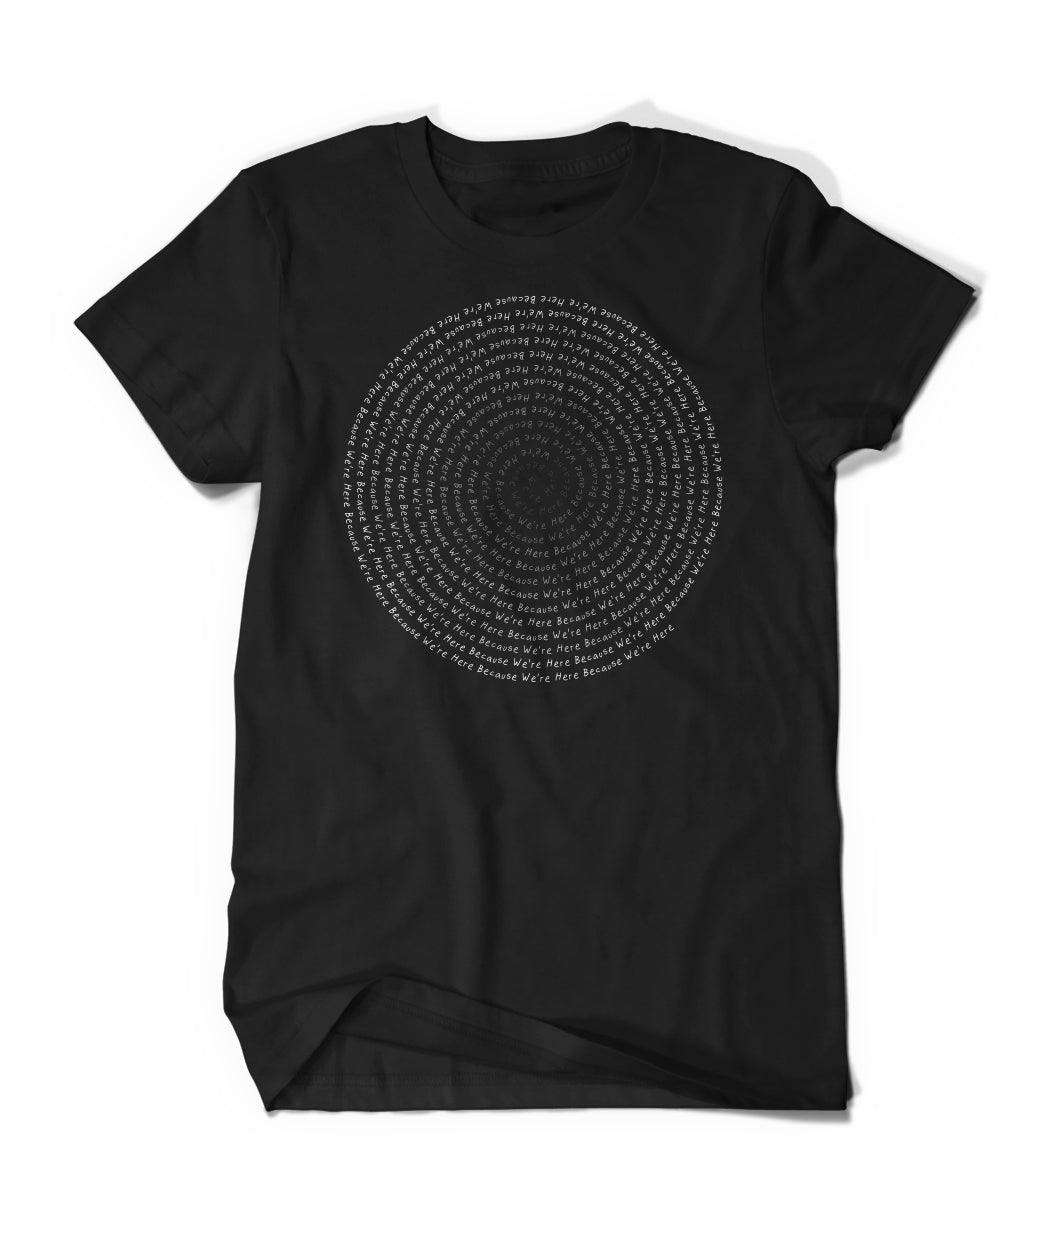 Black shirt with a spiral circle that fades from white to black inward. Text says, 